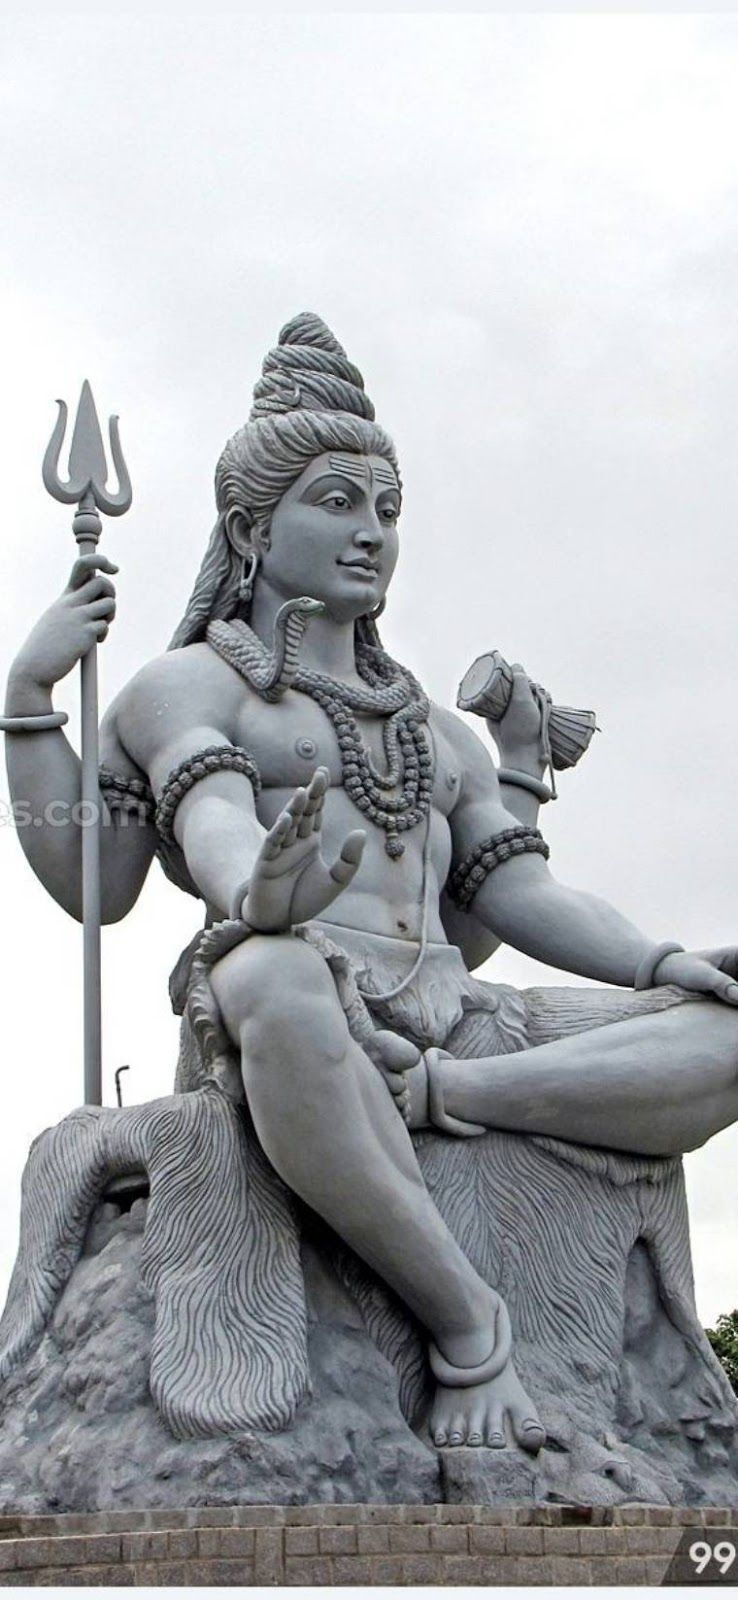 Lord Shiva Mobile HD Wallpapers 1000 Free Lord Shiva Mobile Wallpaper  Images For All Devices